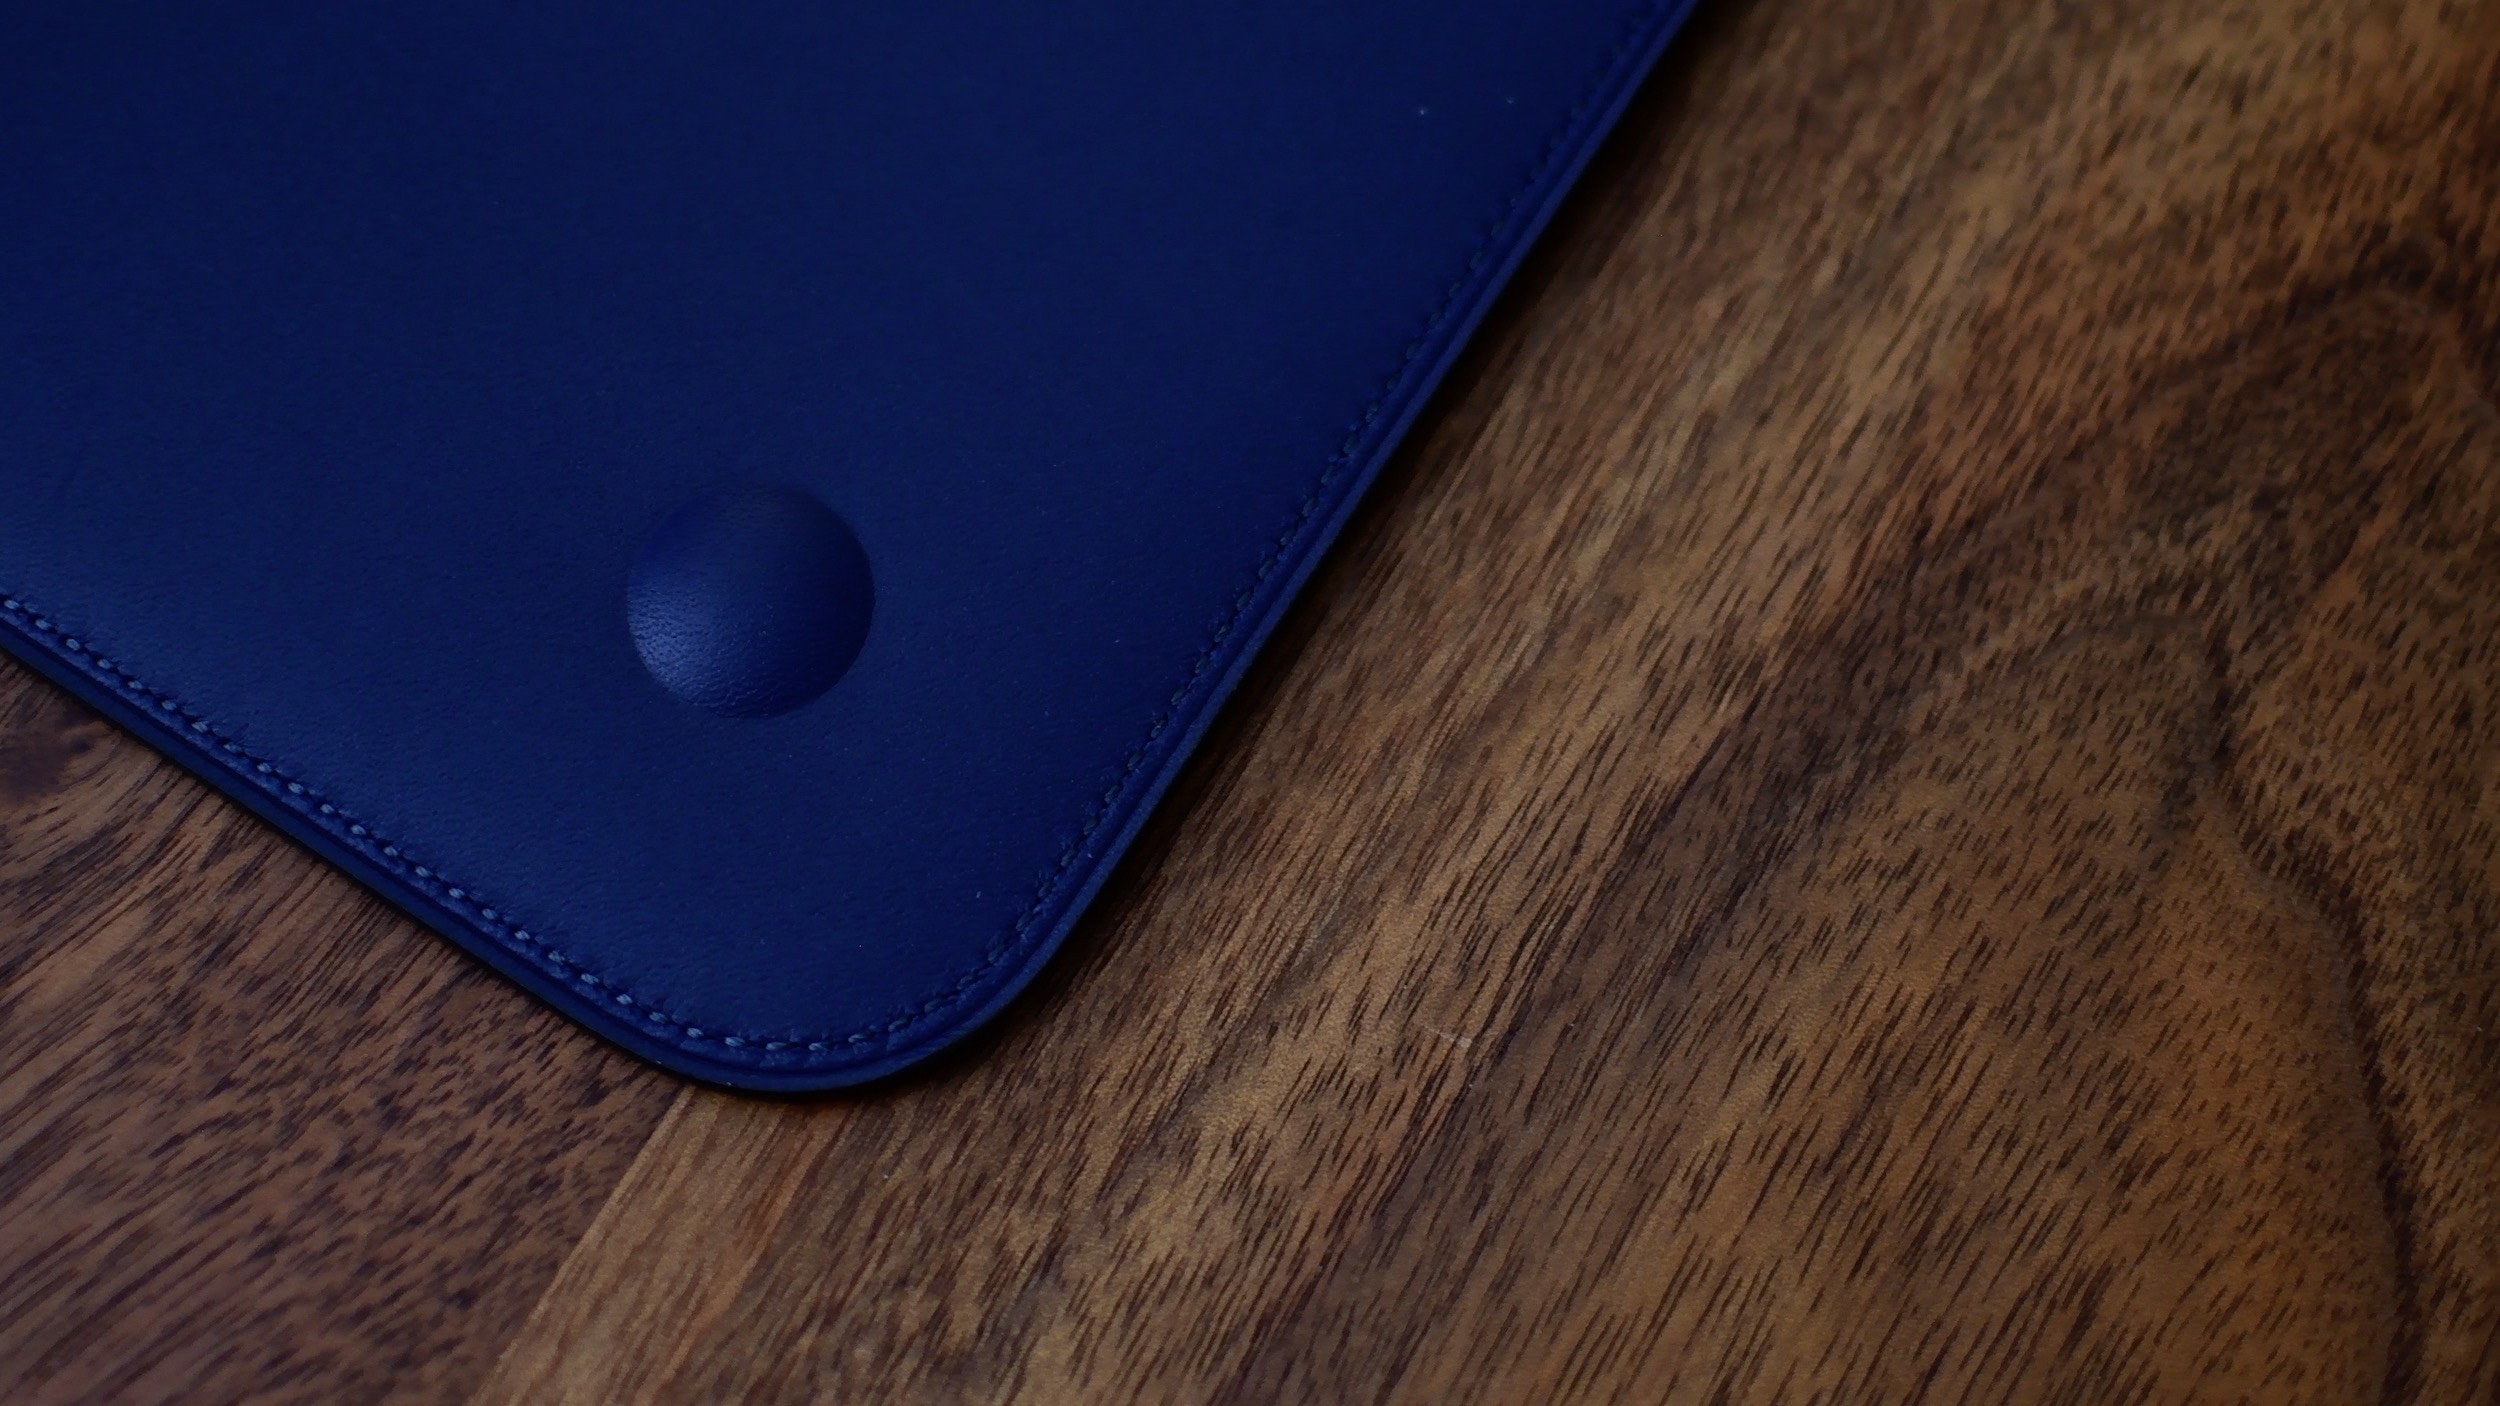 Review: Apple's $149 leather sleeve for 12